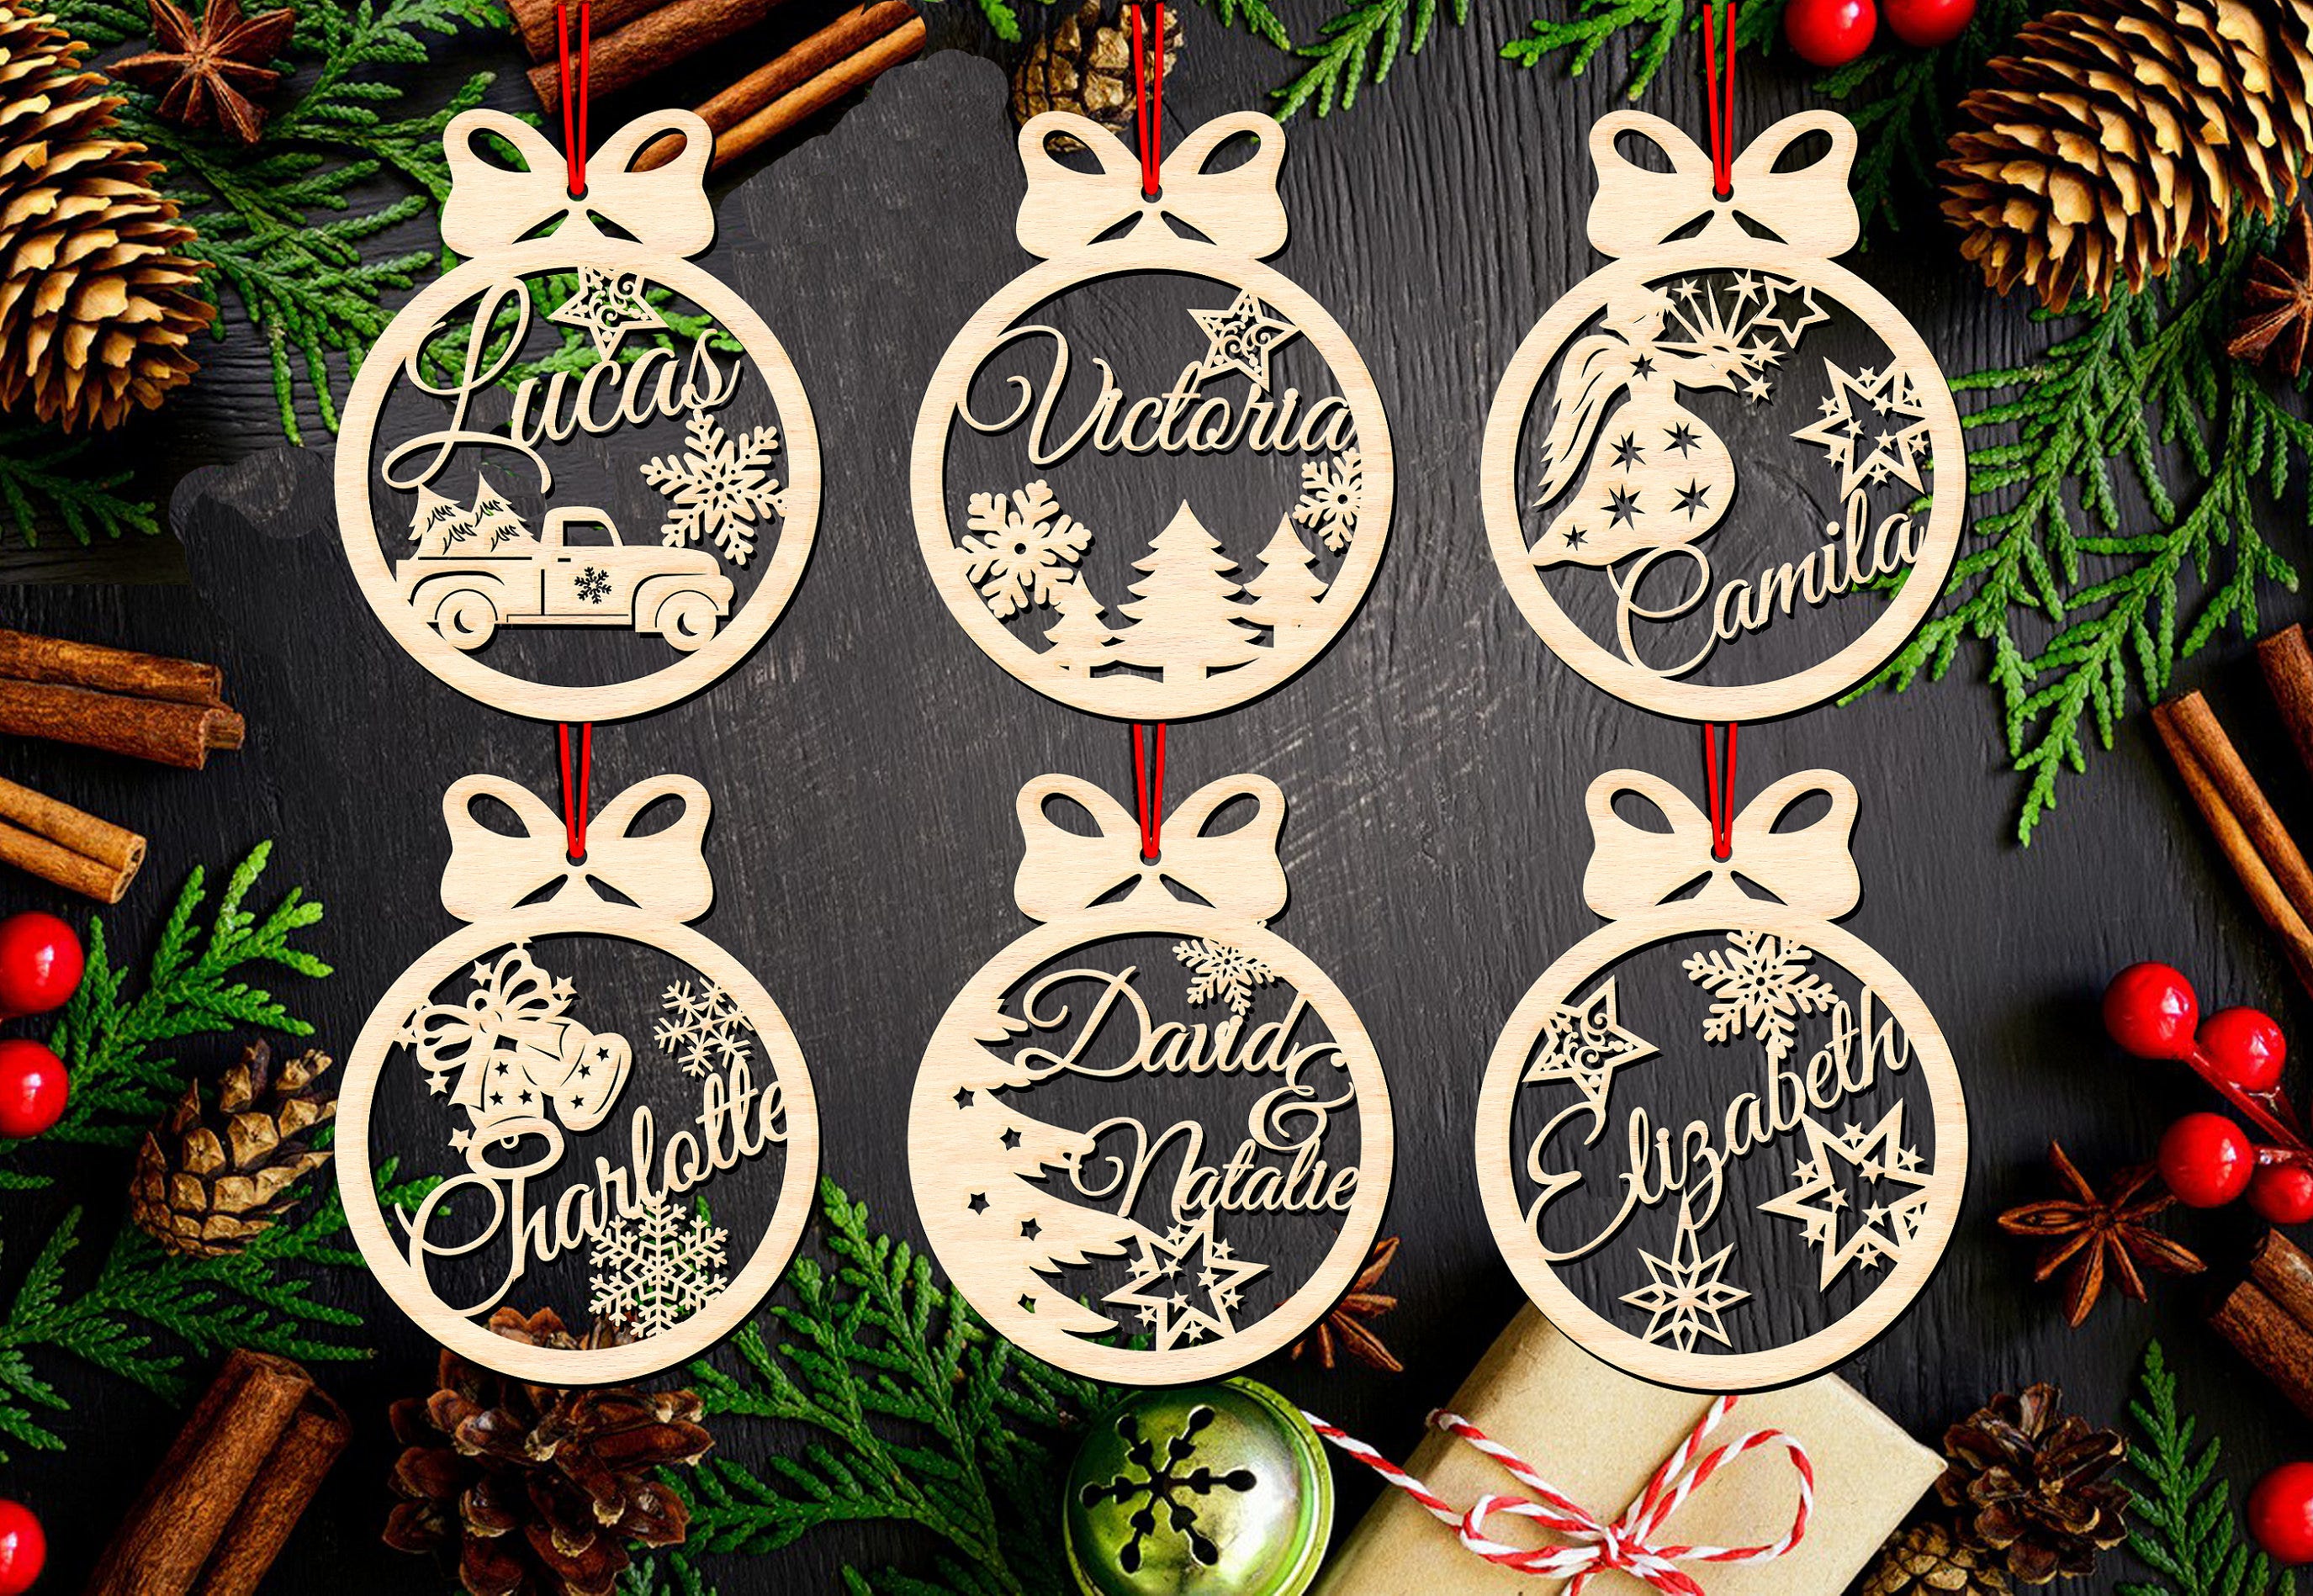 Christmas Ornaments SVG Laser Cut Files, Personalizable 6 Designs For Christmas Tree Ornaments With Editable Text, Christmas Tree Toys SVG